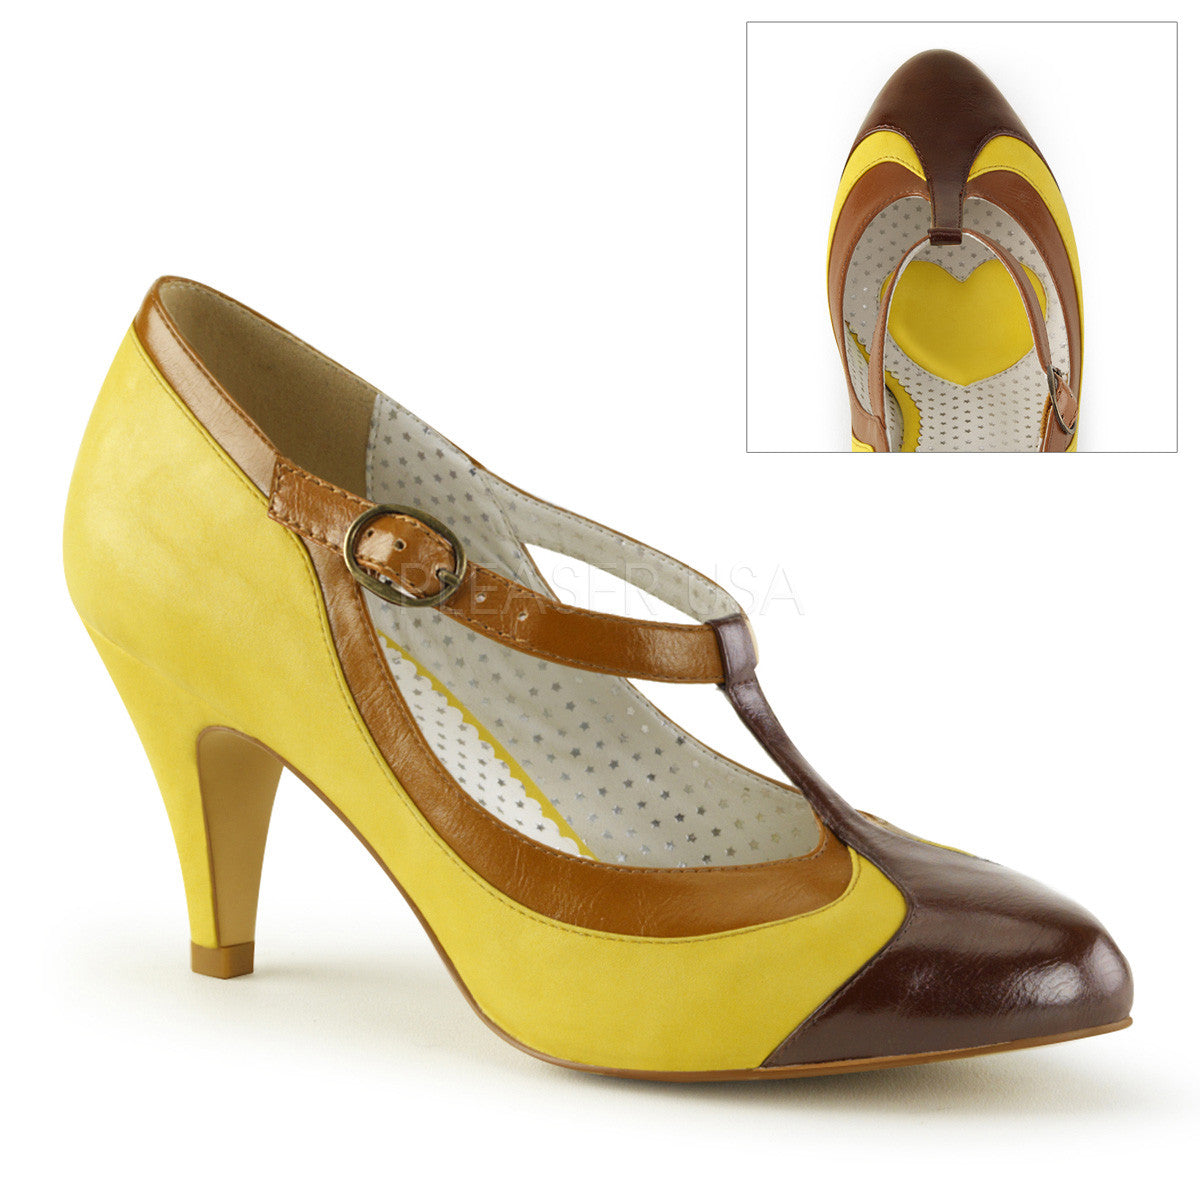 Pin Up Couture PEACH-03 Yellow Retro-Inspired Pumps - Shoecup.com - 1